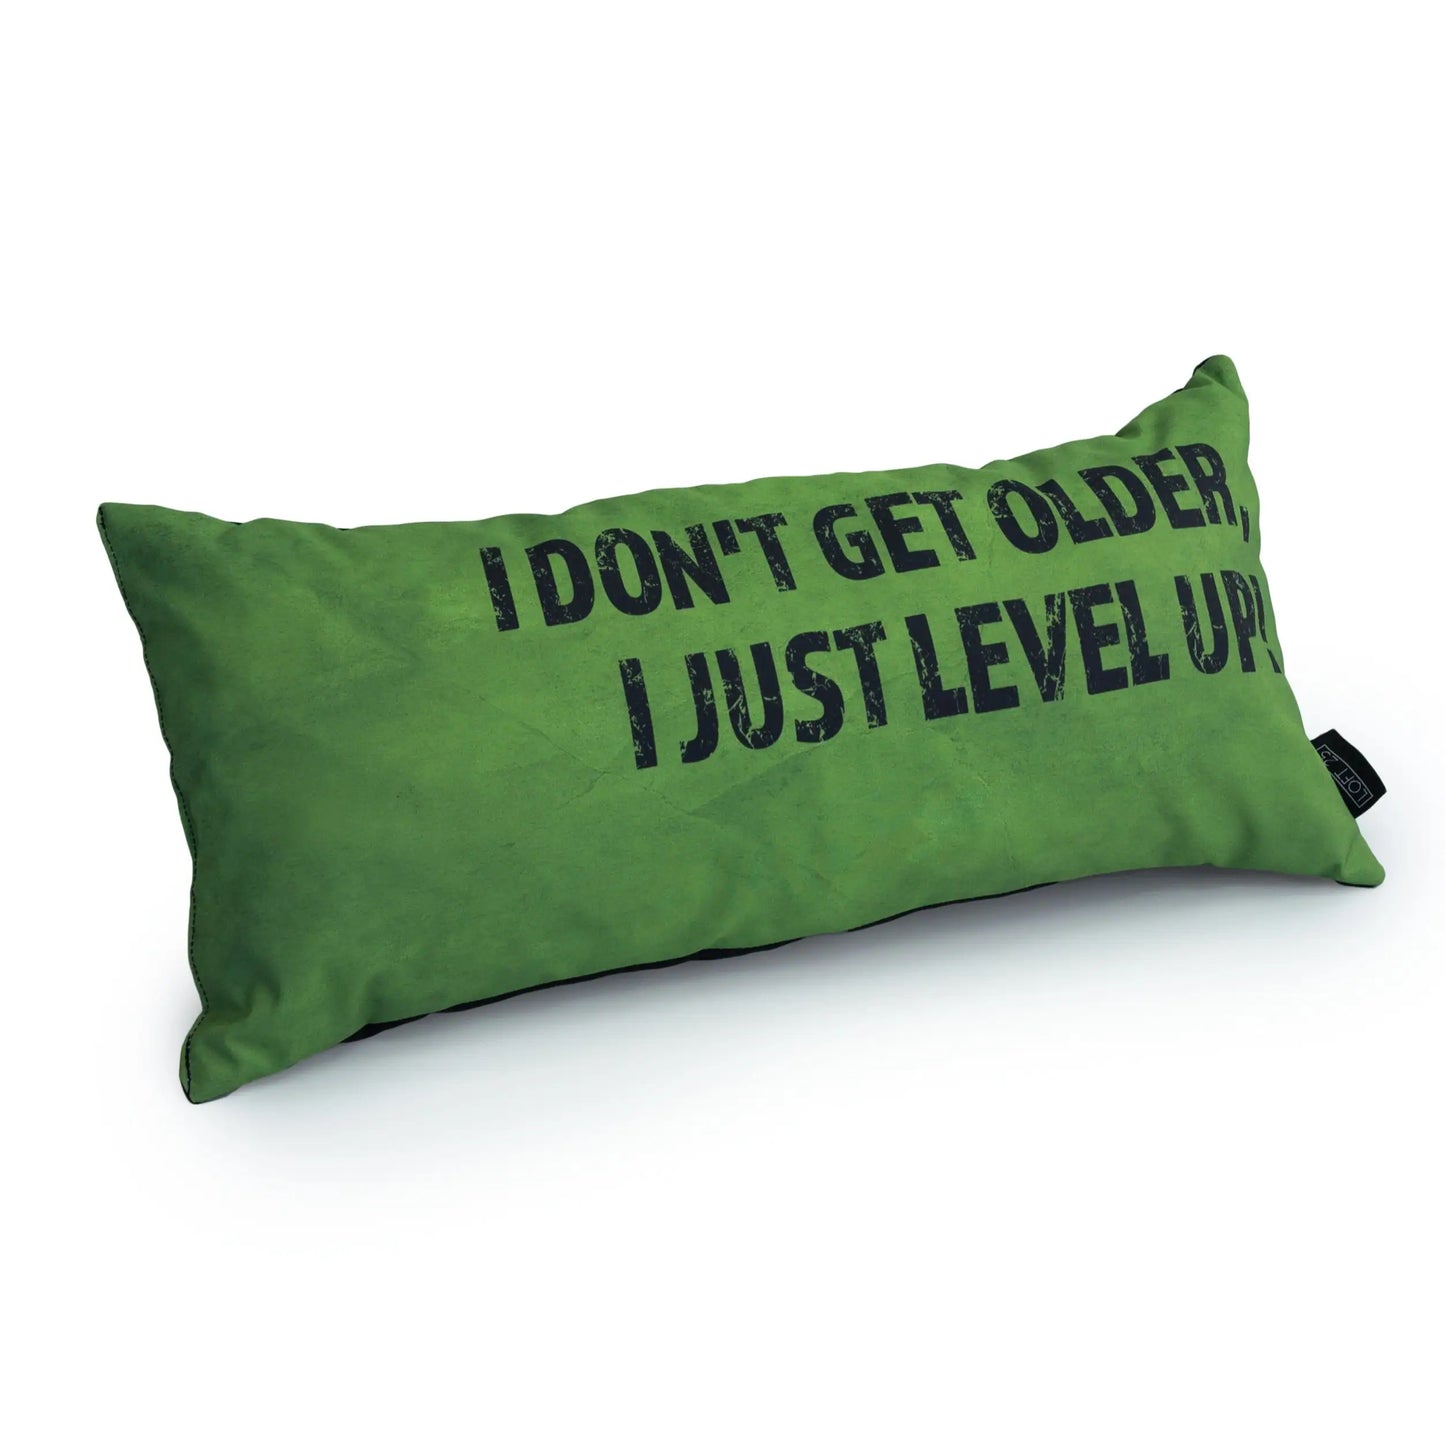 A green rectangular pillow with the text "I don't get older, I just level up."